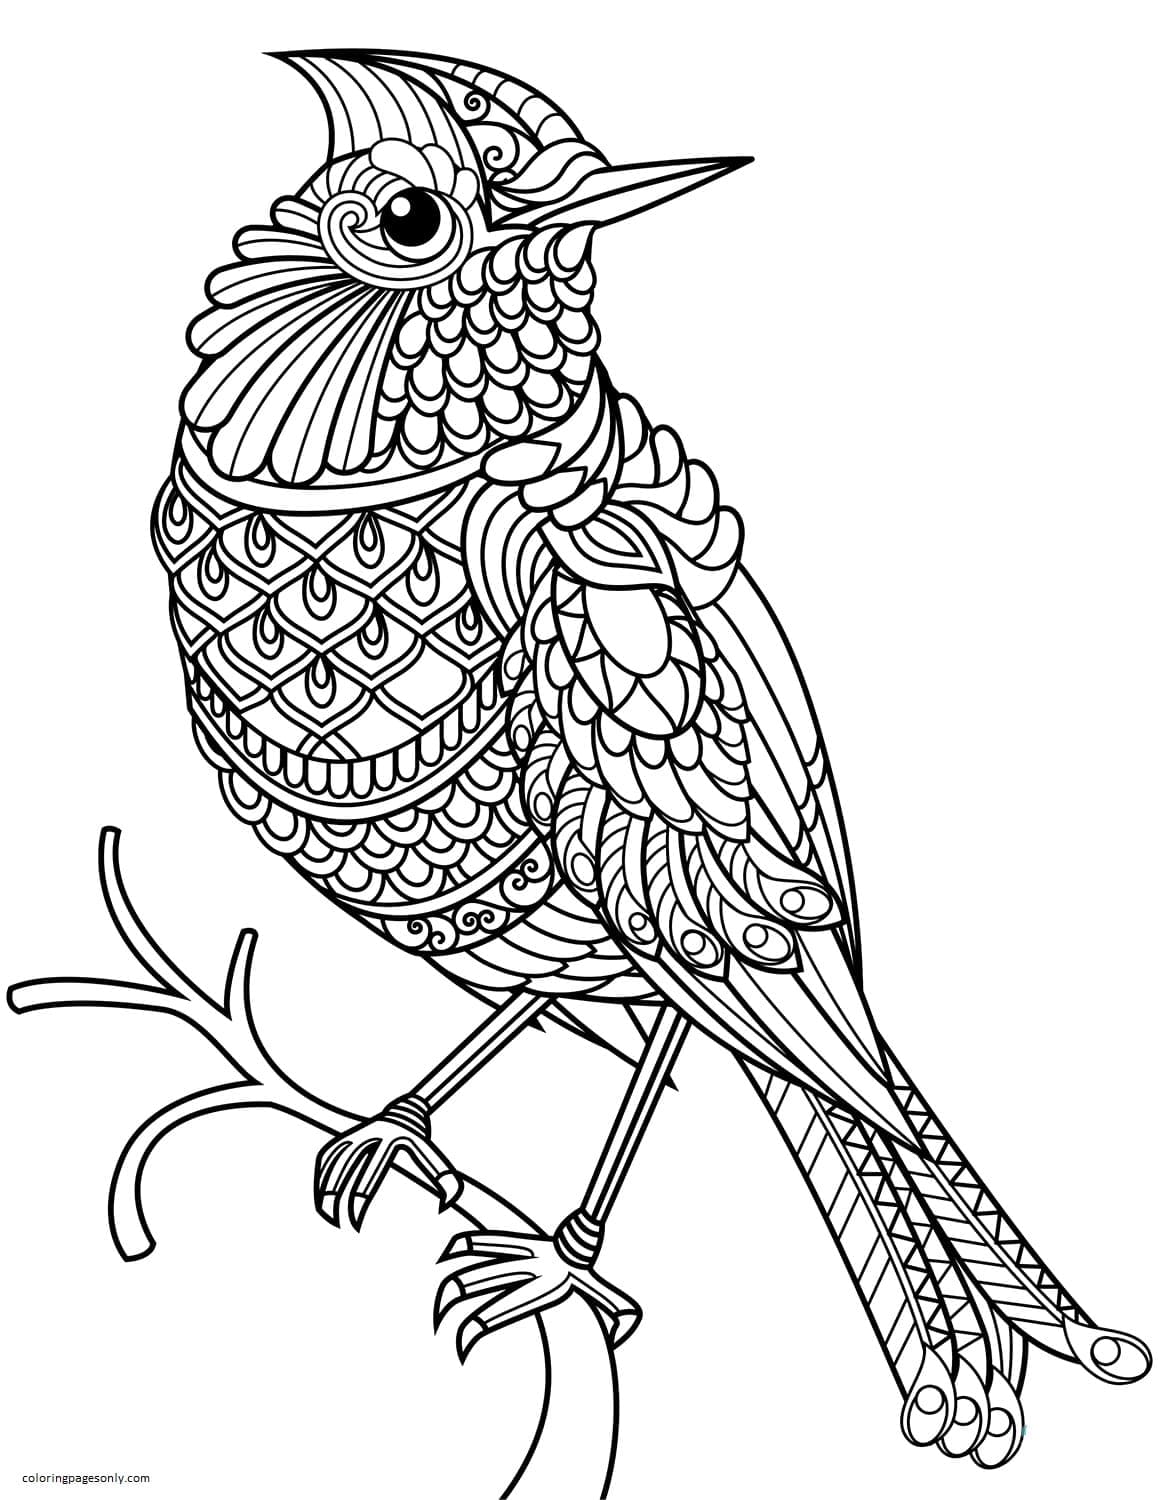 Northern Cardinal Zentangle Coloring Pages - Teenage Coloring Pages - Coloring  Pages For Kids And Adults